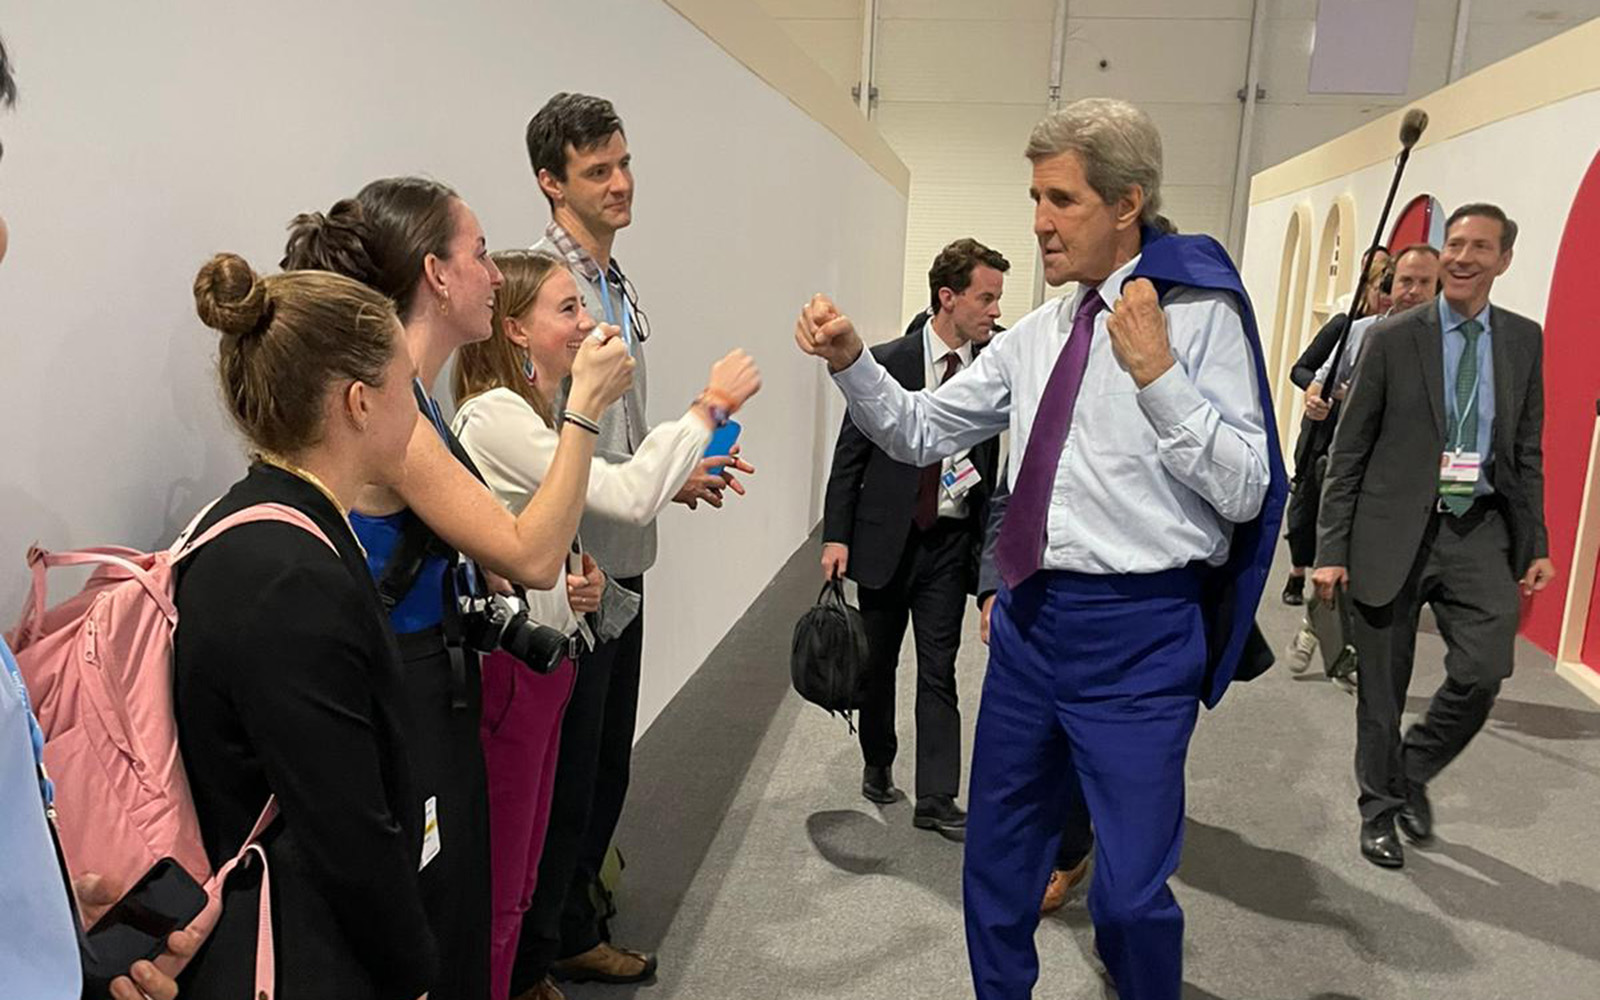 COP27 Fellows with John Kerry, U.S. Special Presidential Envoy for Climate (contributed photo)